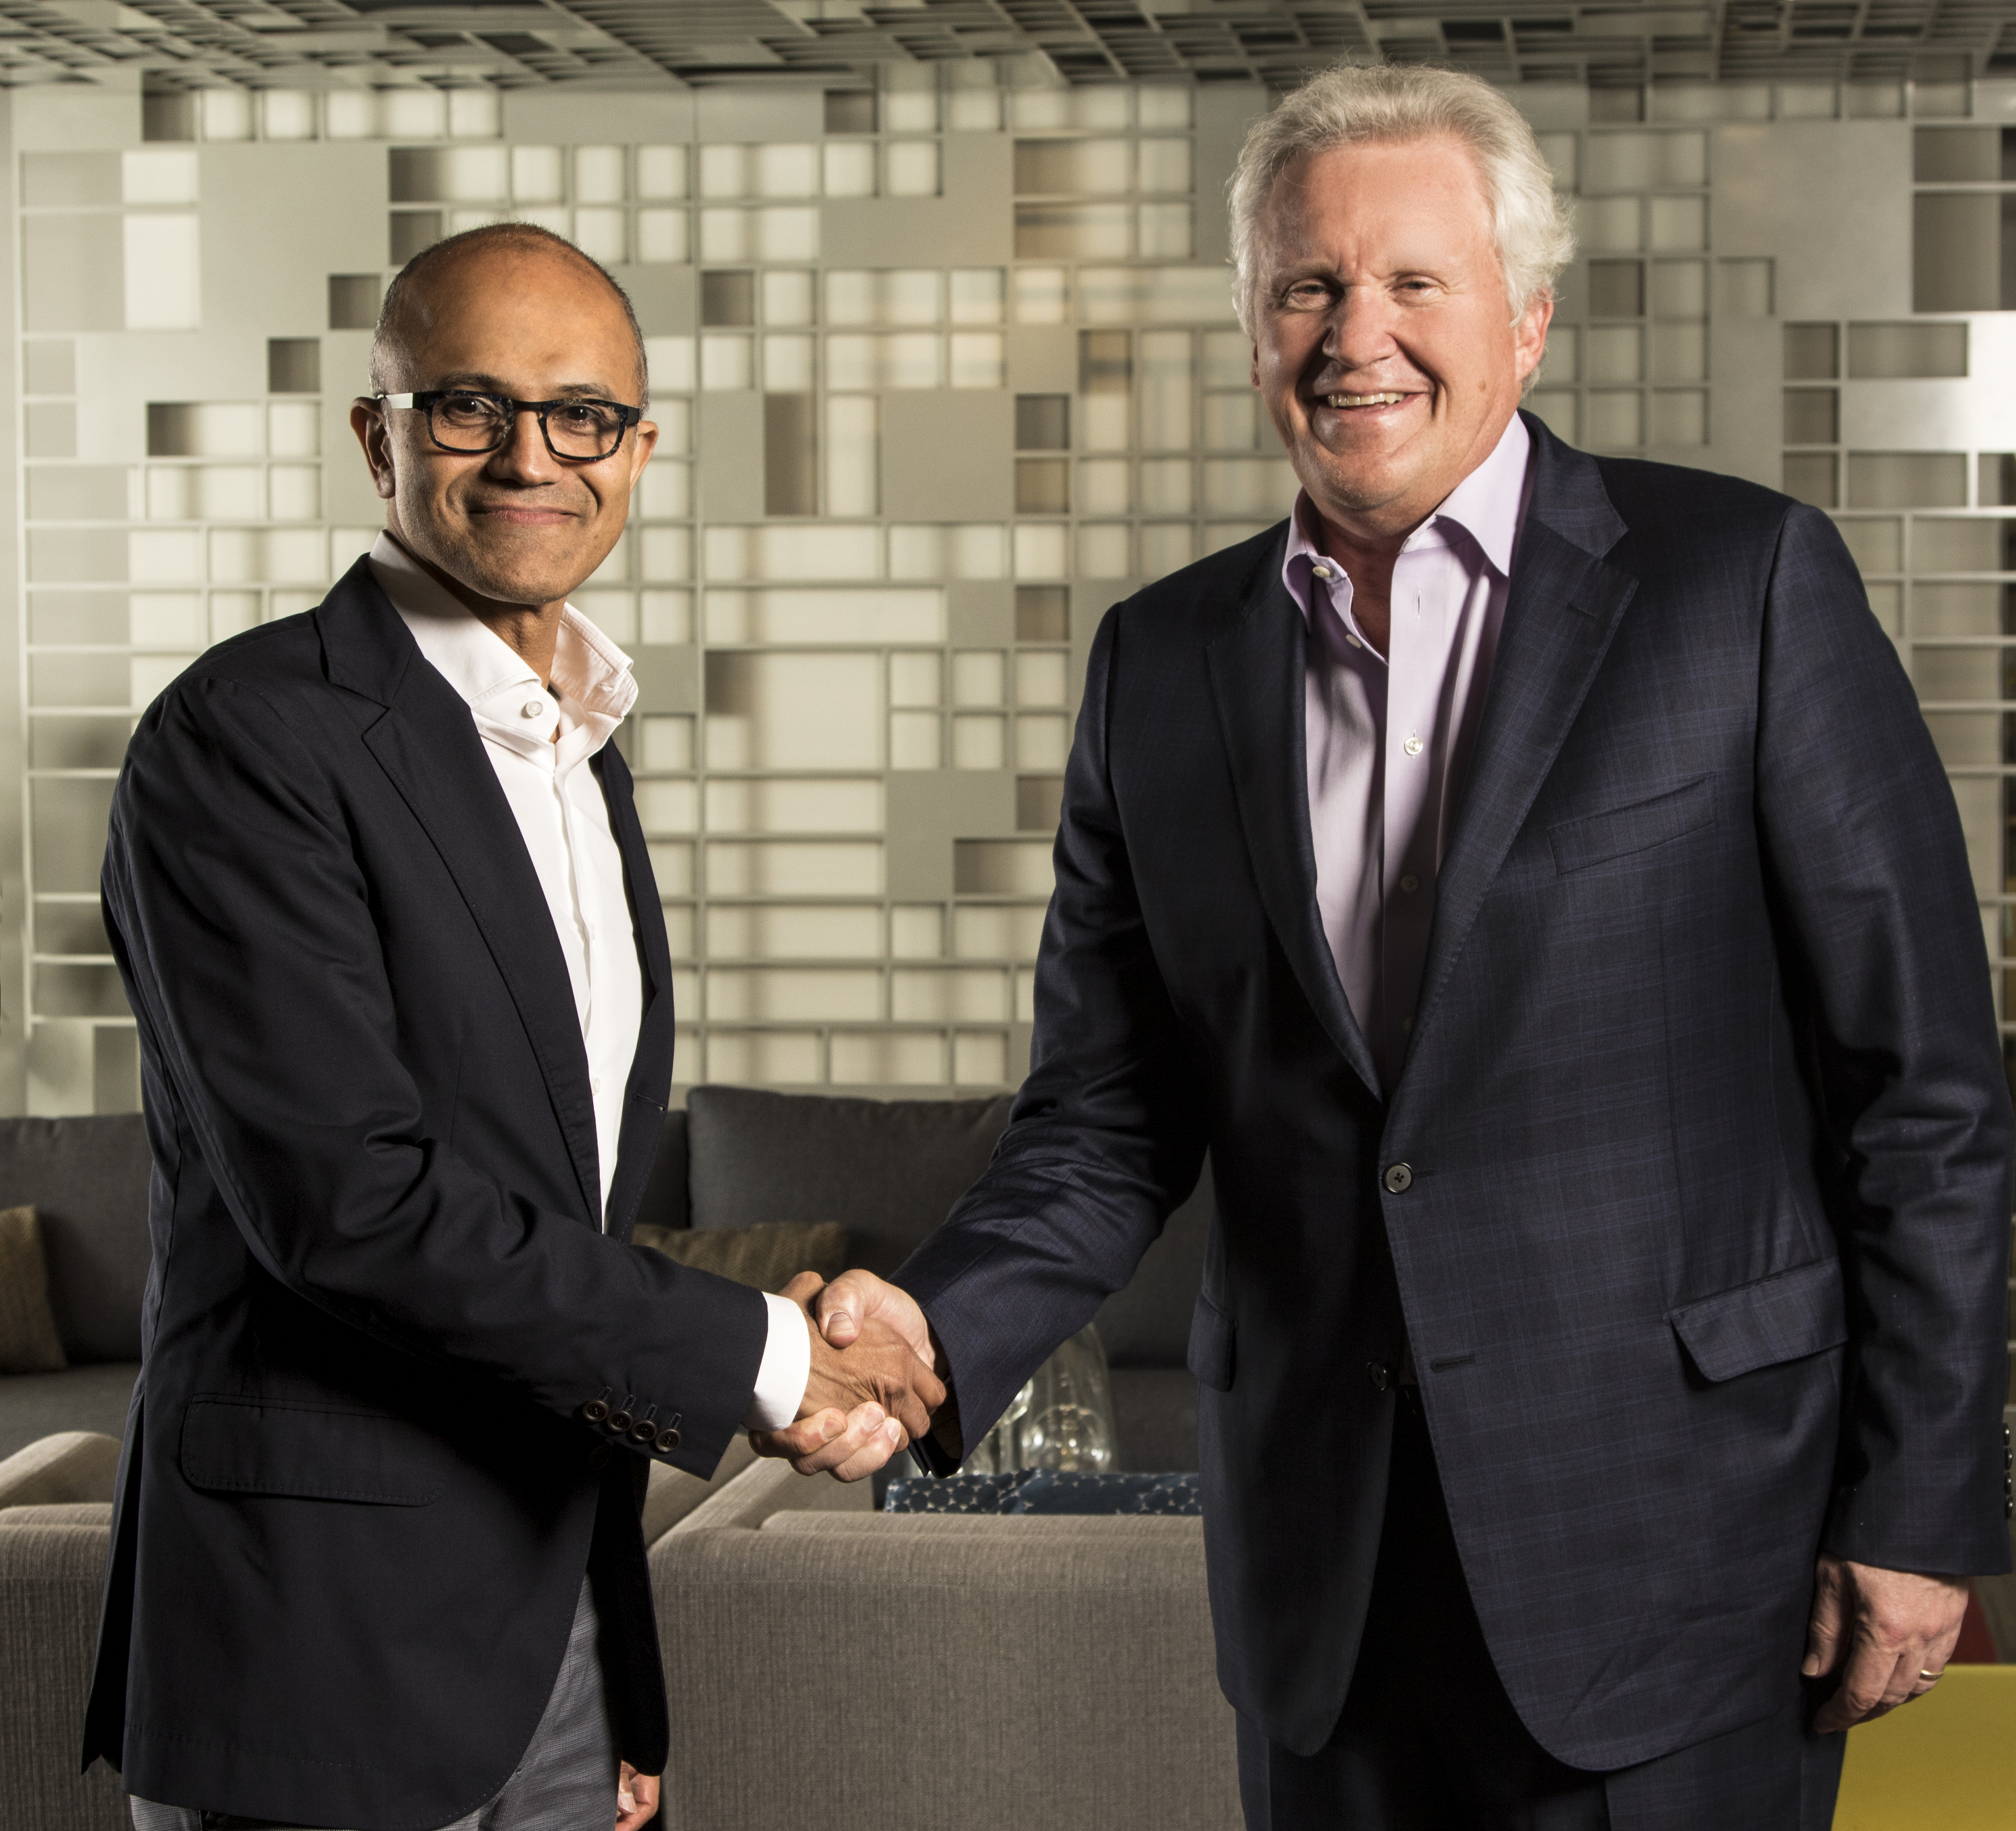 Microsoft CEO Satya Nadella and GE CEO Jeff Immelt today announced a partnership that will make GE’s Predix platform for the Industrial Internet available on the Microsoft Azure cloud.